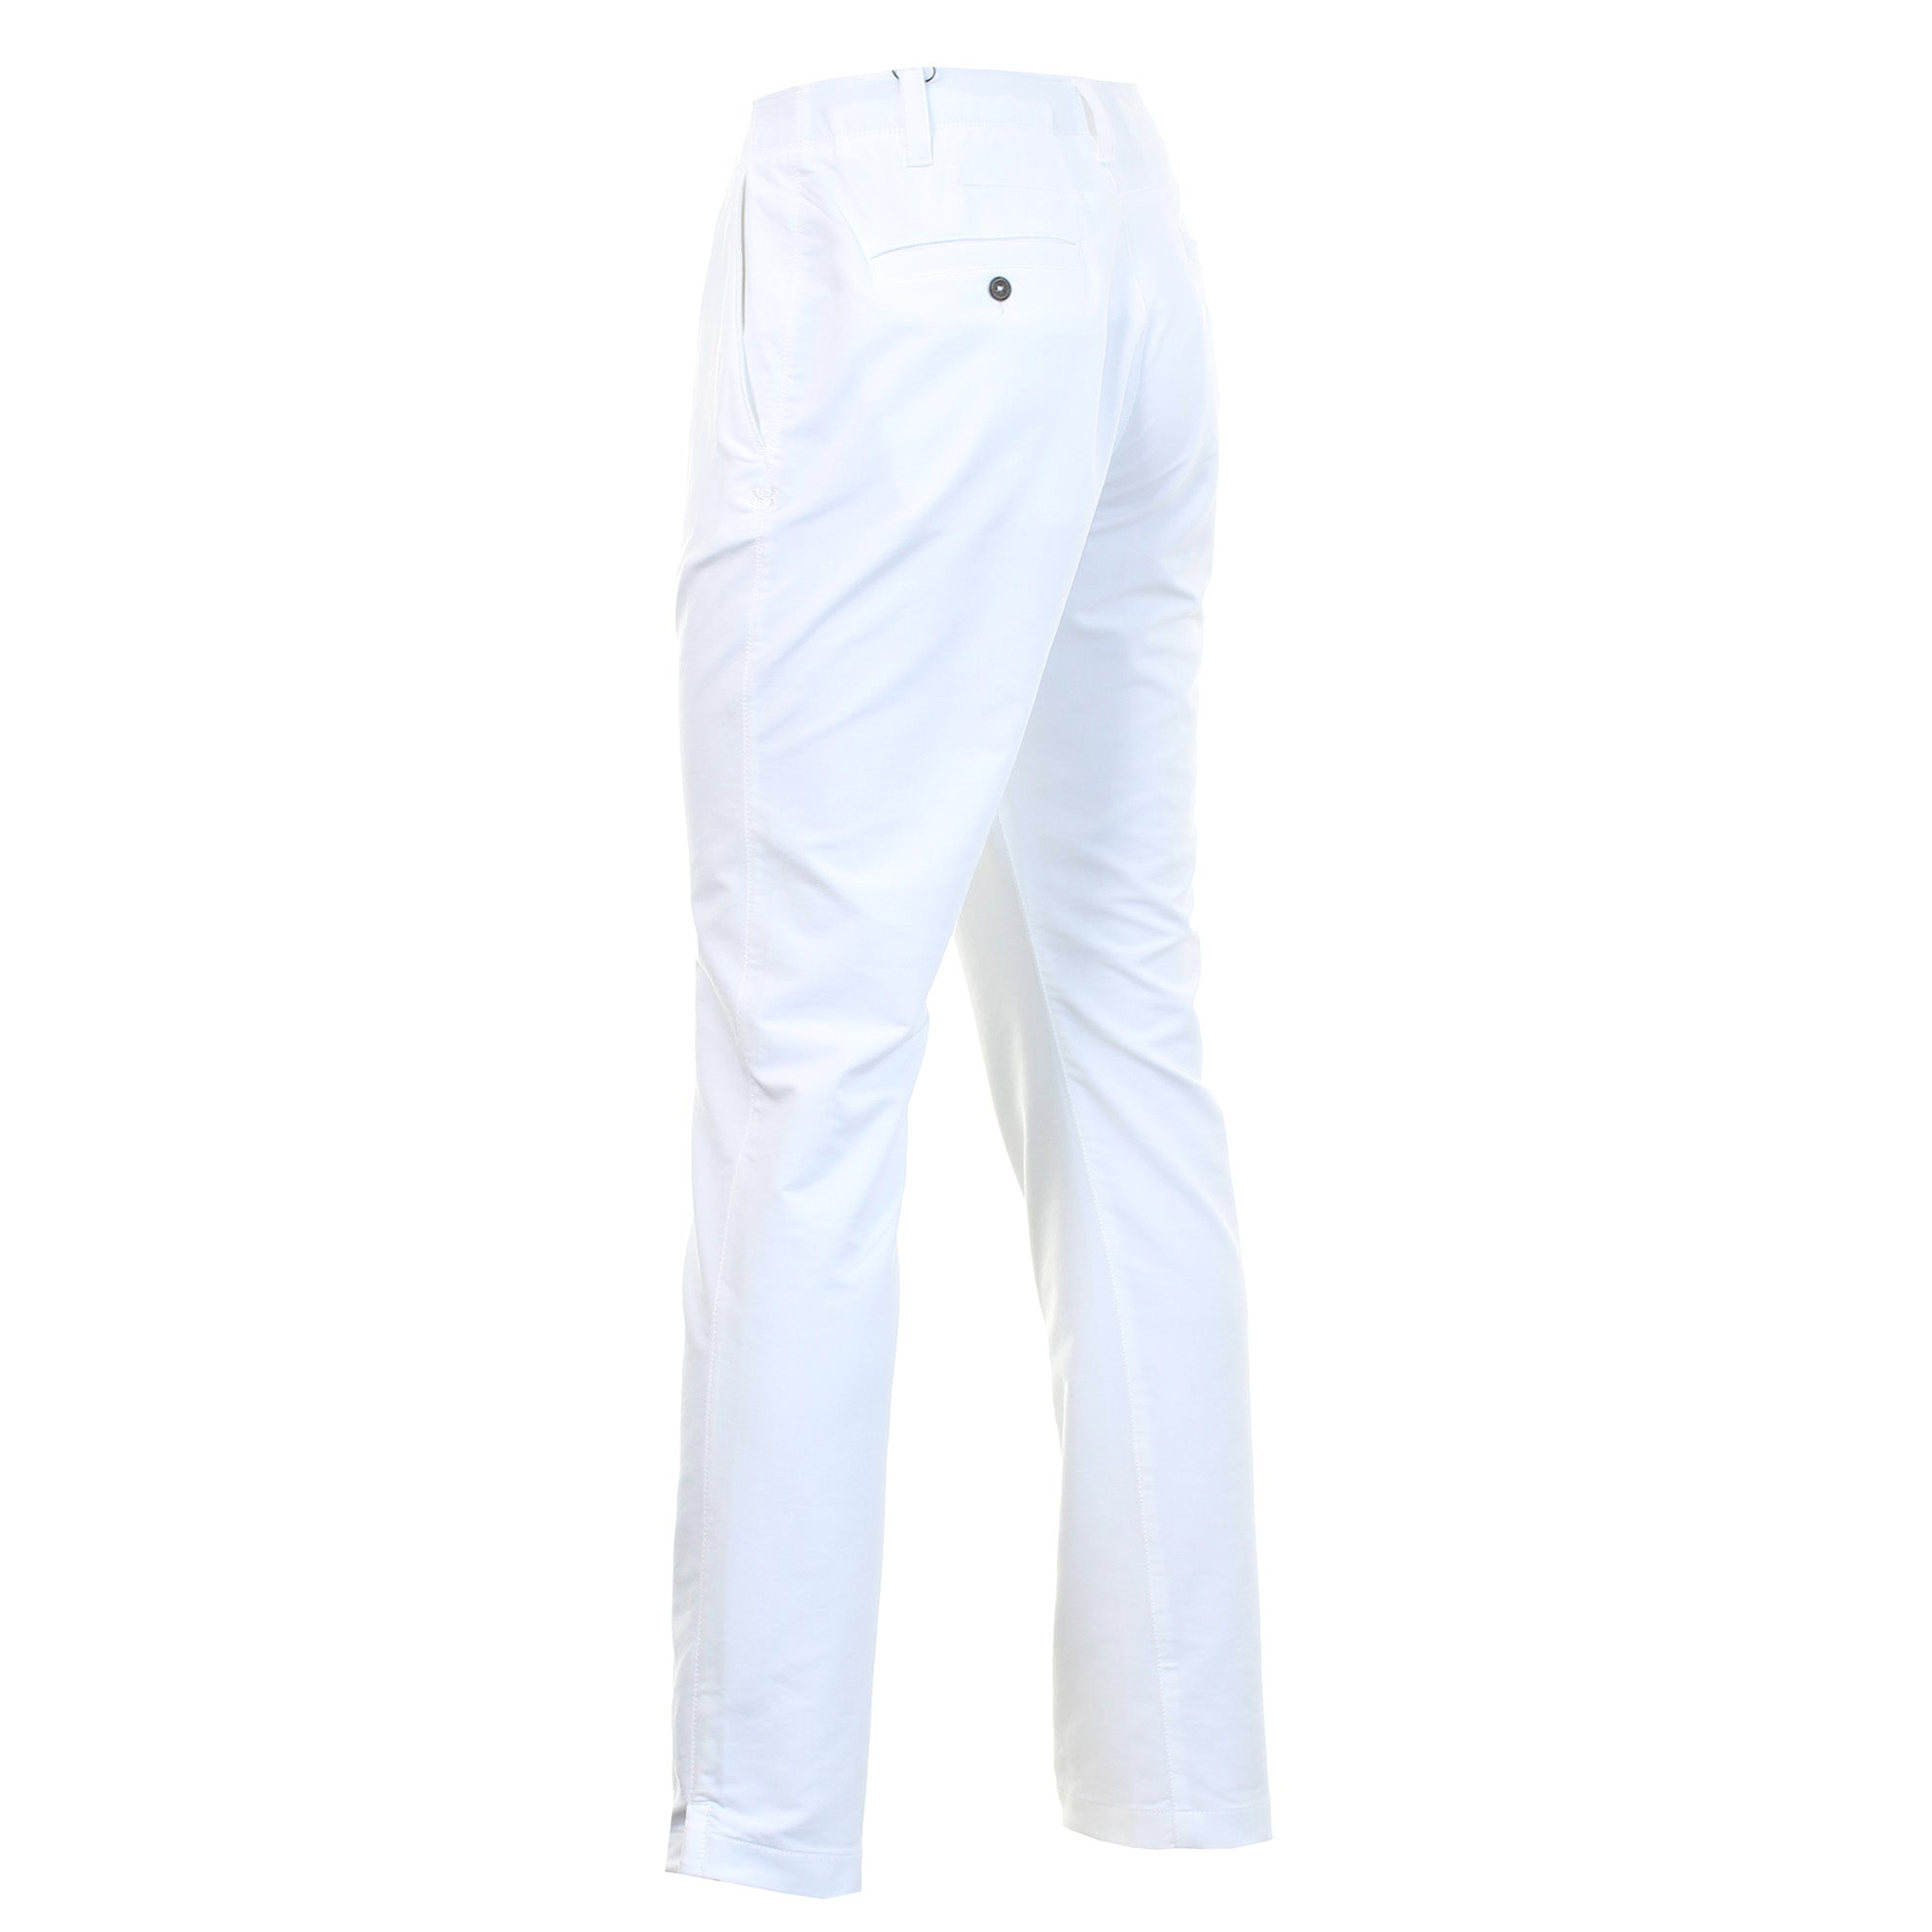 under armour matchplay tapered trousers grey